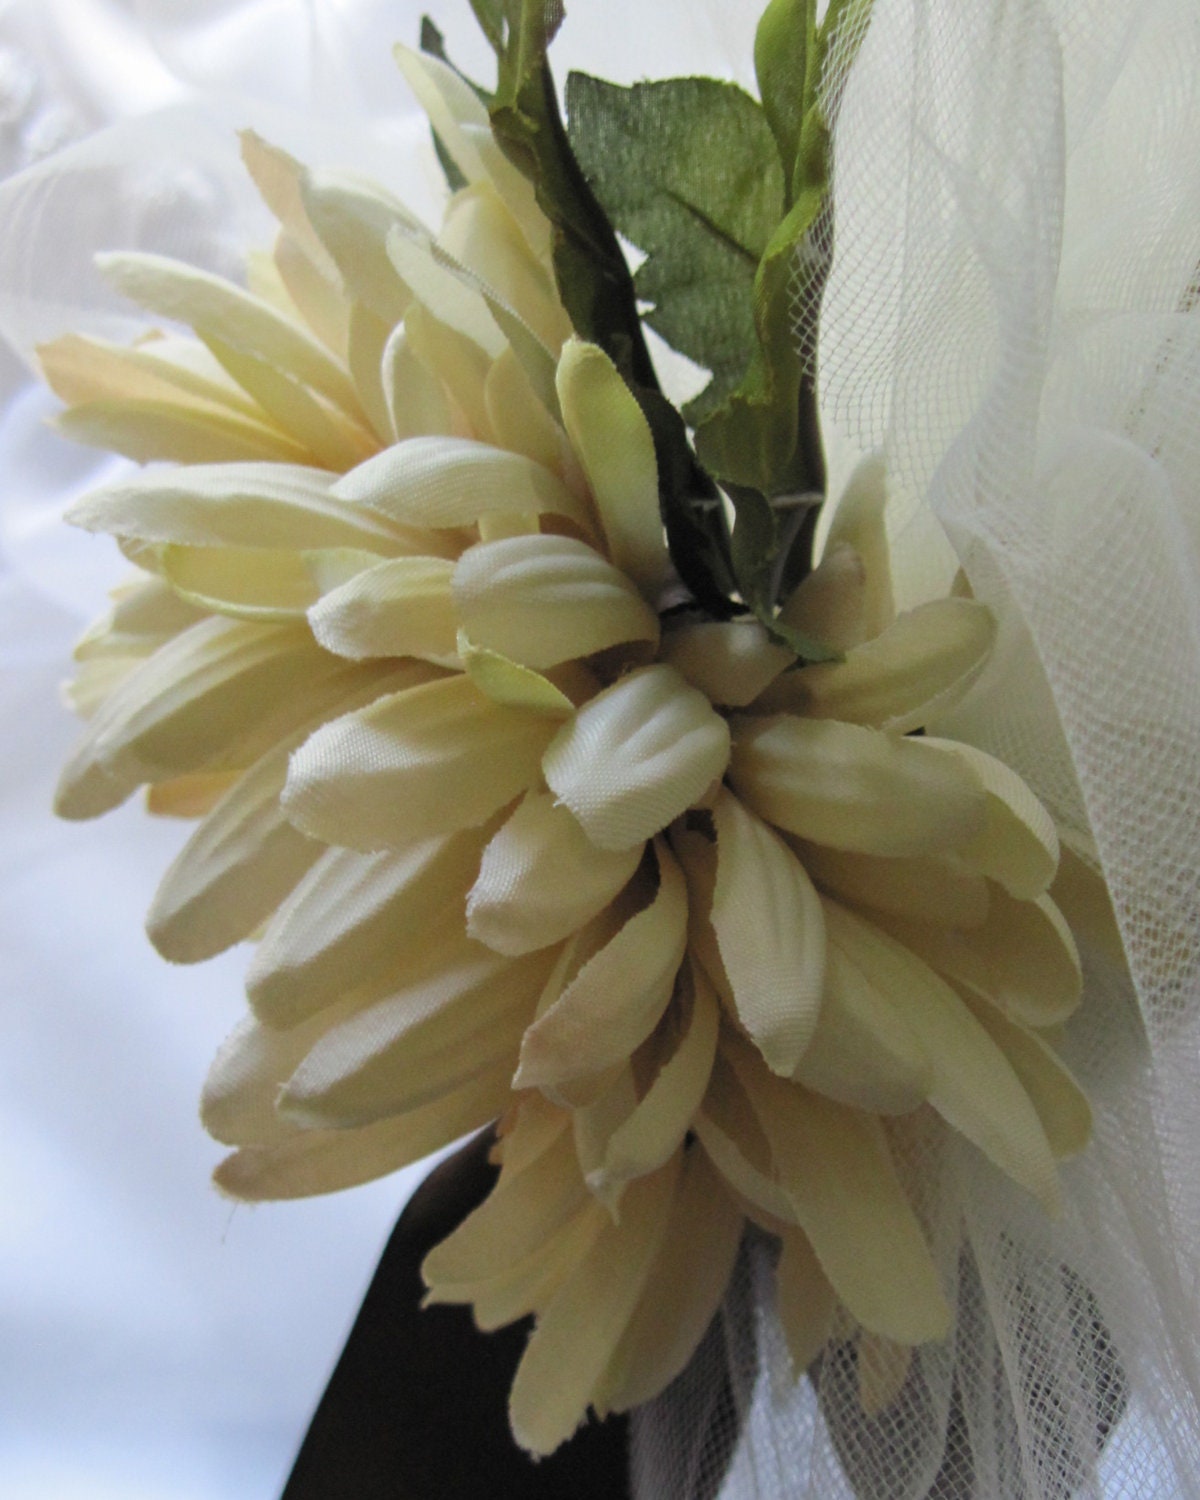 Wedding Bouquet, Silky Beige Chrysanthemum Blossom, Green Leaves, Attaches to Wedding Art  Mirrors, For Bride, Bridesmaid, Or Maid of Honor